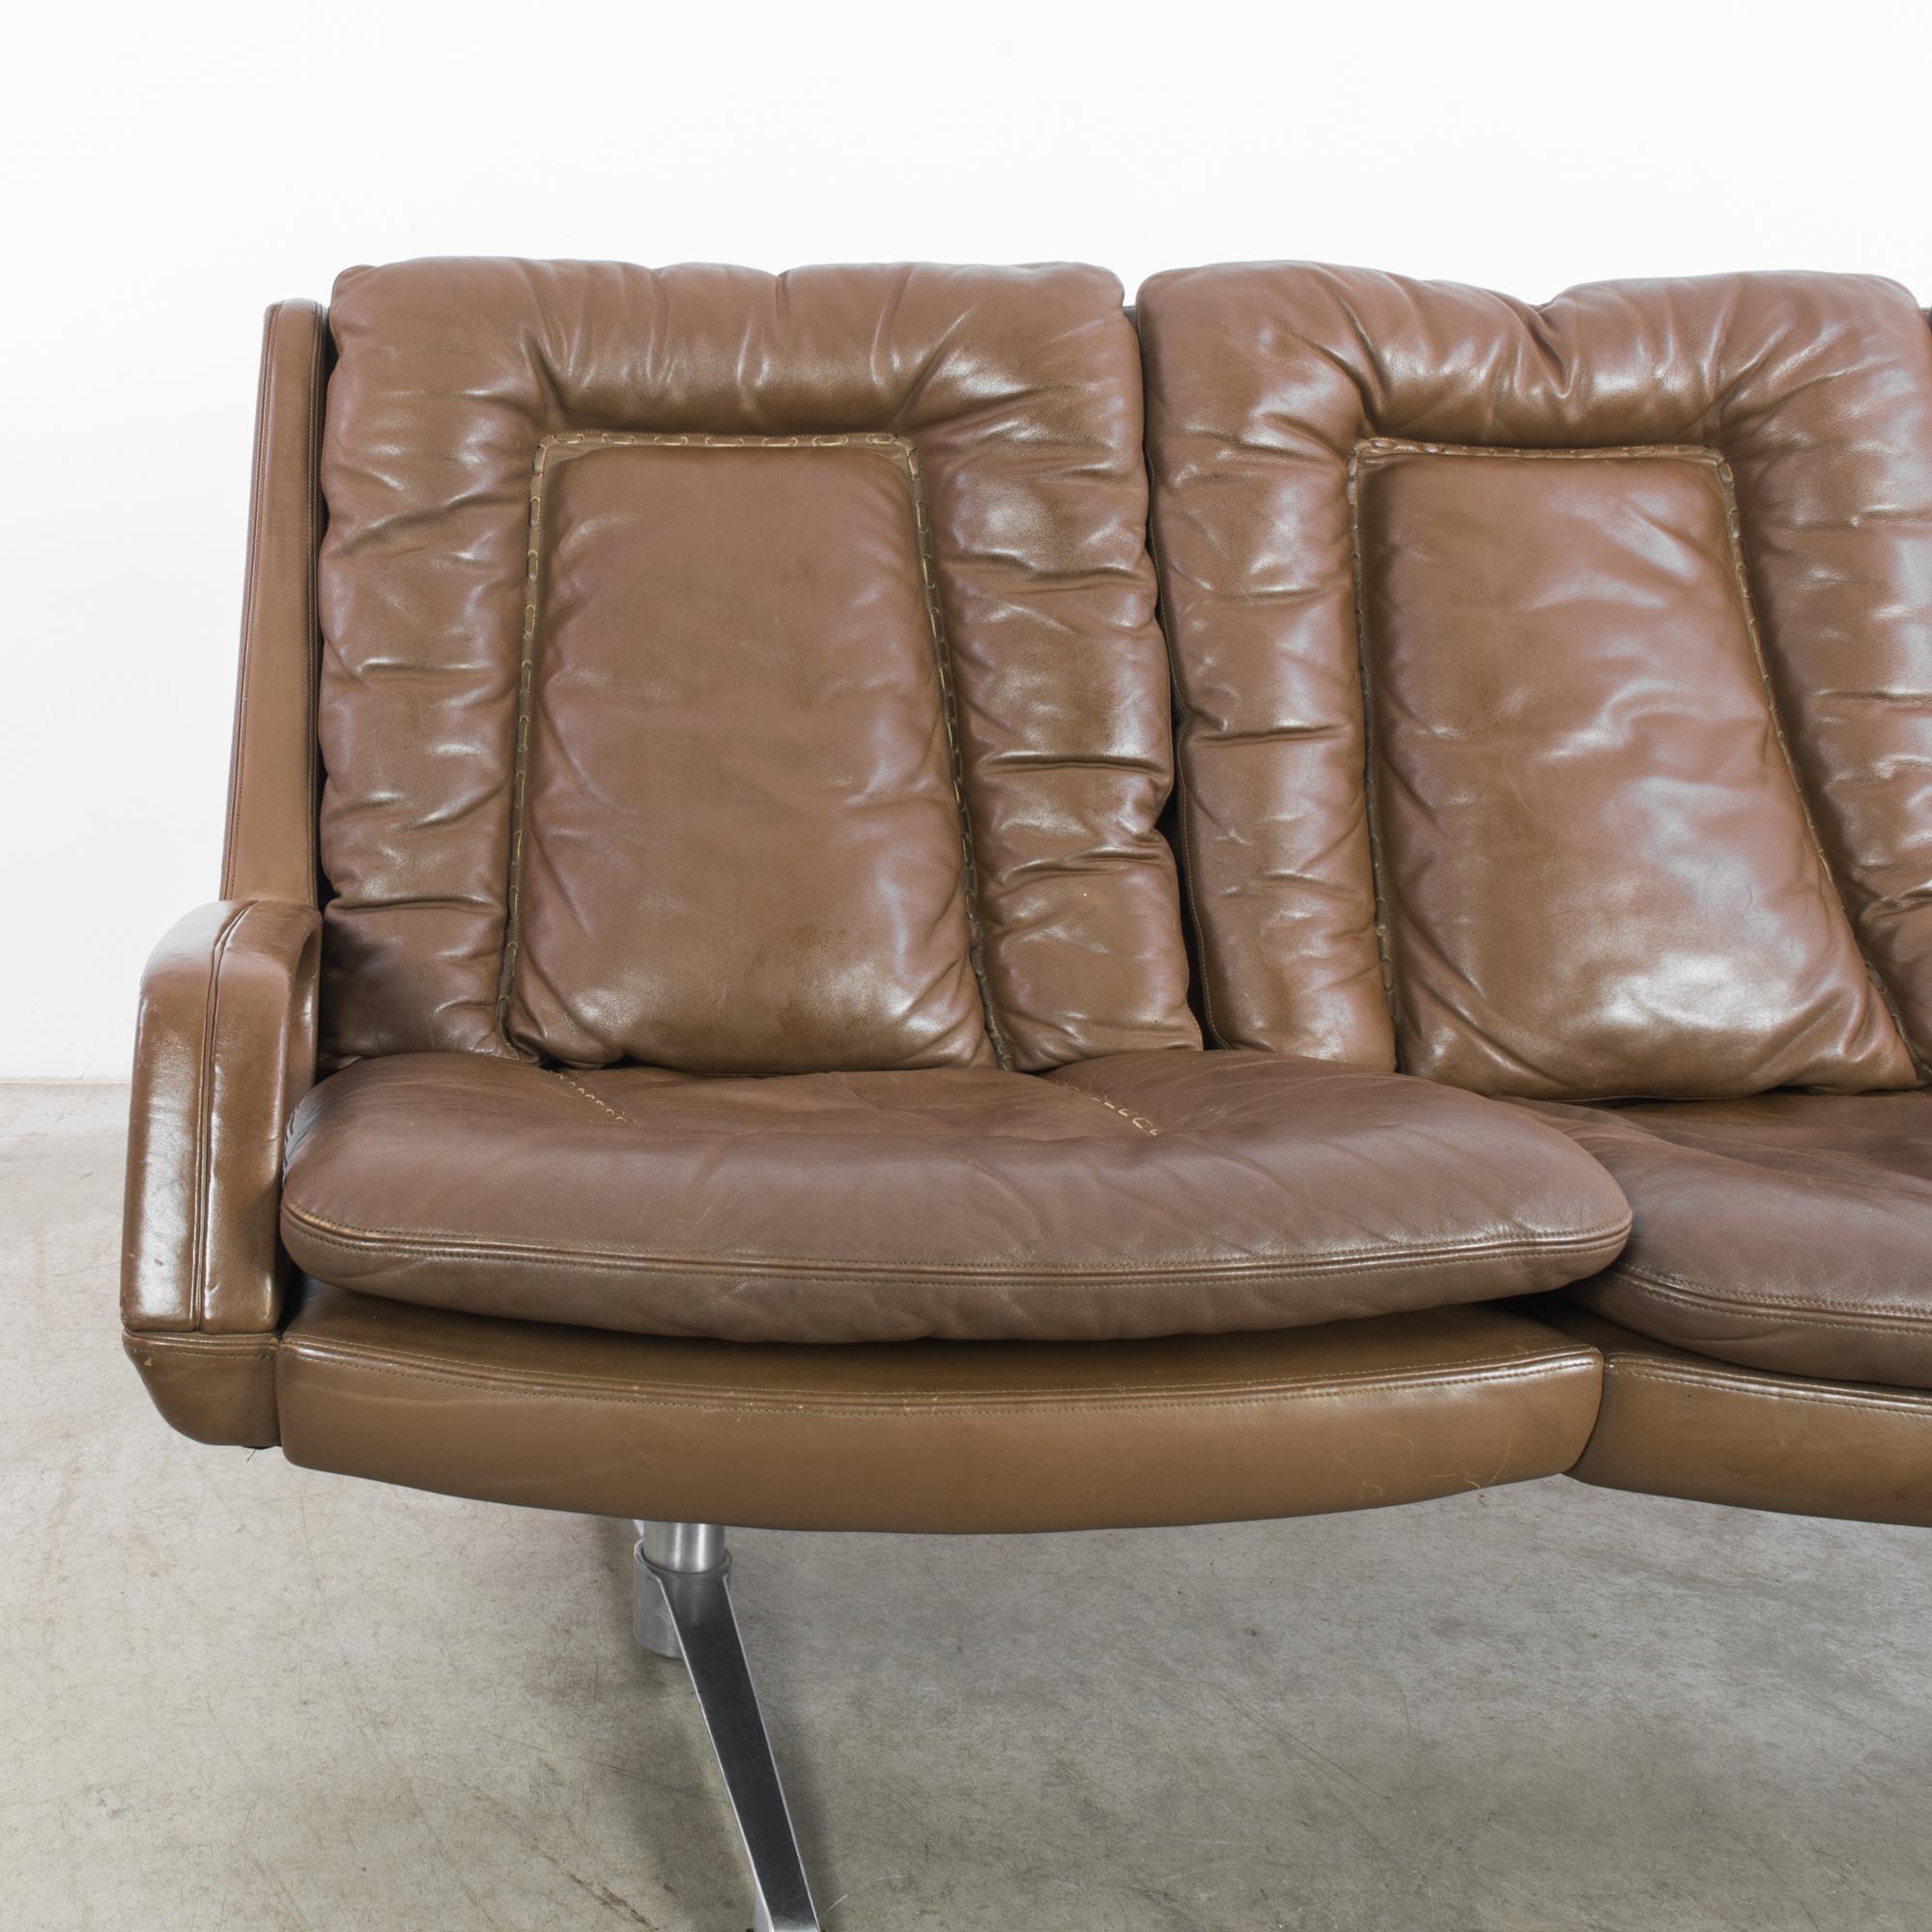 A leather sofa from Denmark, circa 1960. The design has a modernist lounge aesthetic; three chocolate brown leather seats are united into a wide bench, elevated upon minimalist silver feet. The comfortable curve of the seats and the plush leather